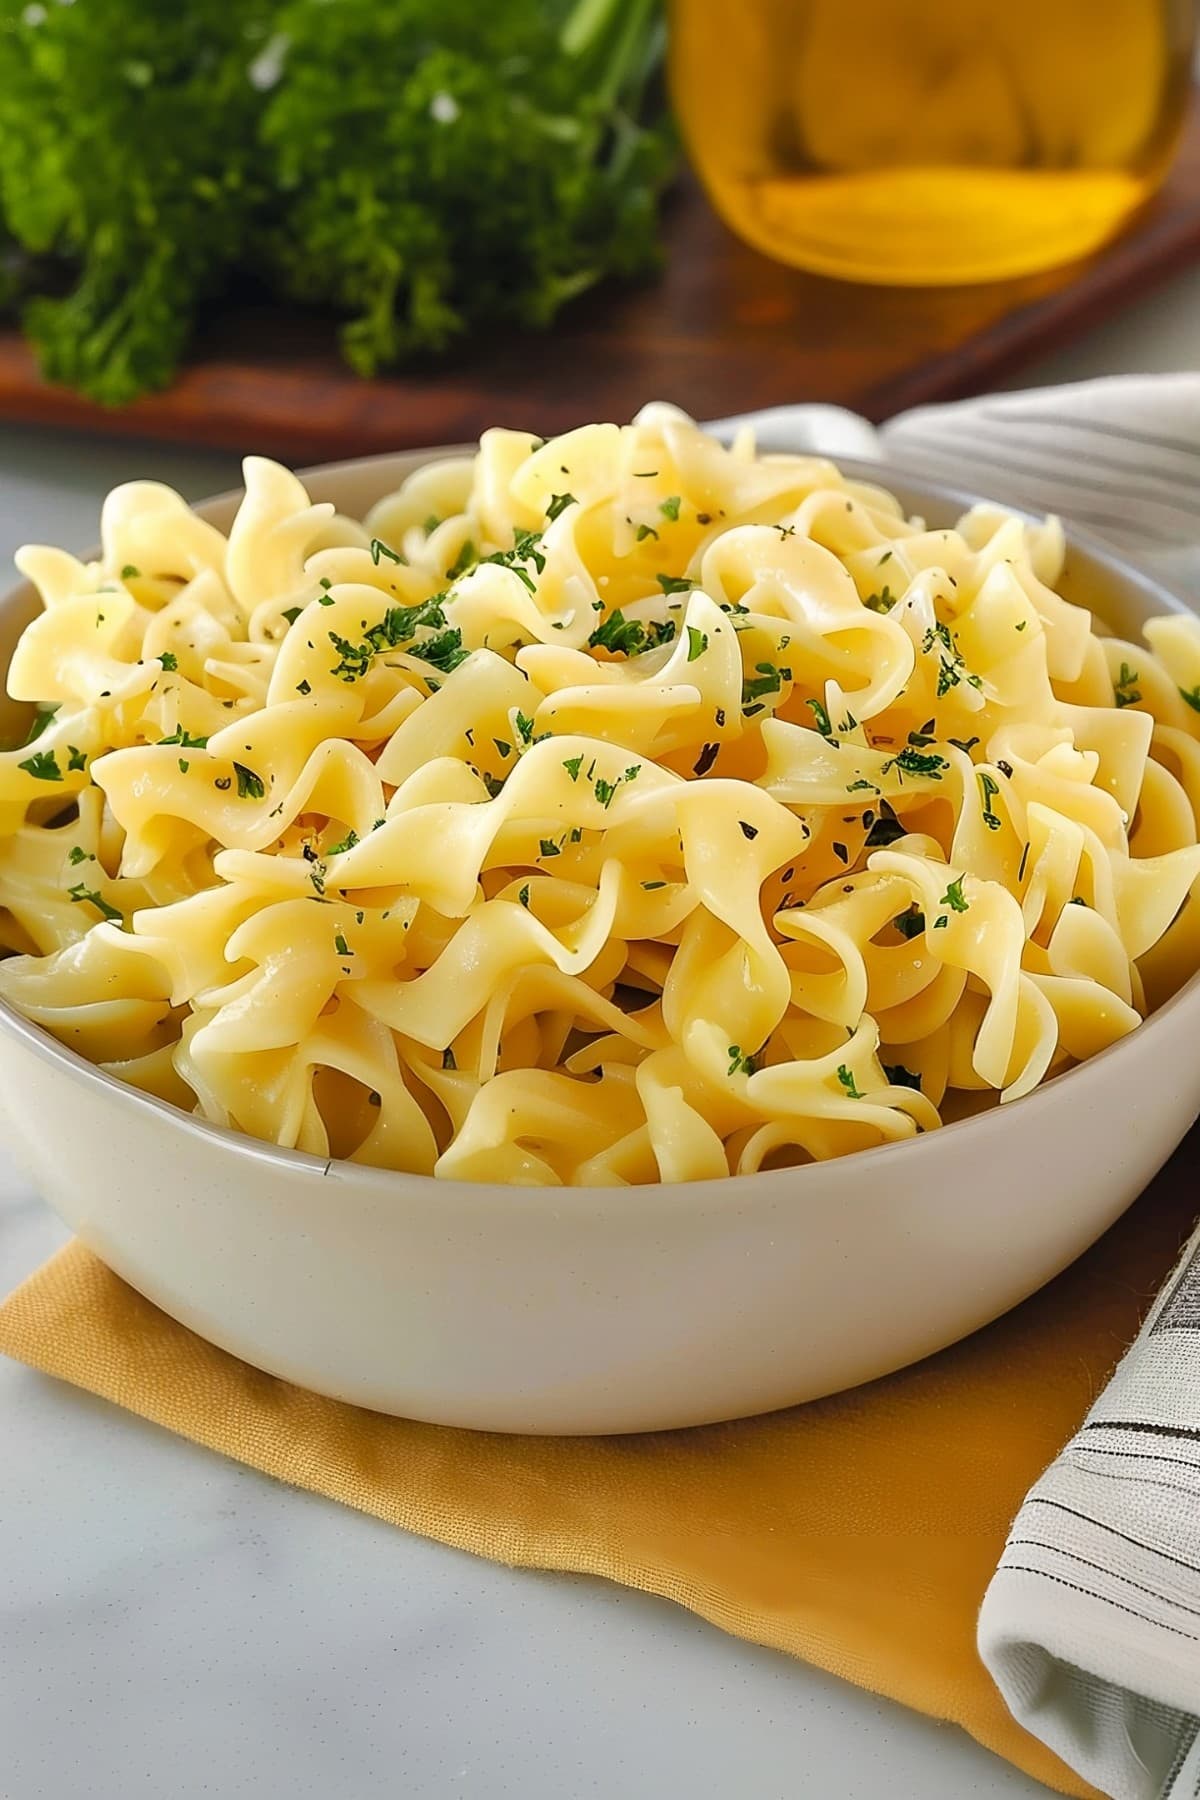 A bowl of Amish egg noodles with parsley